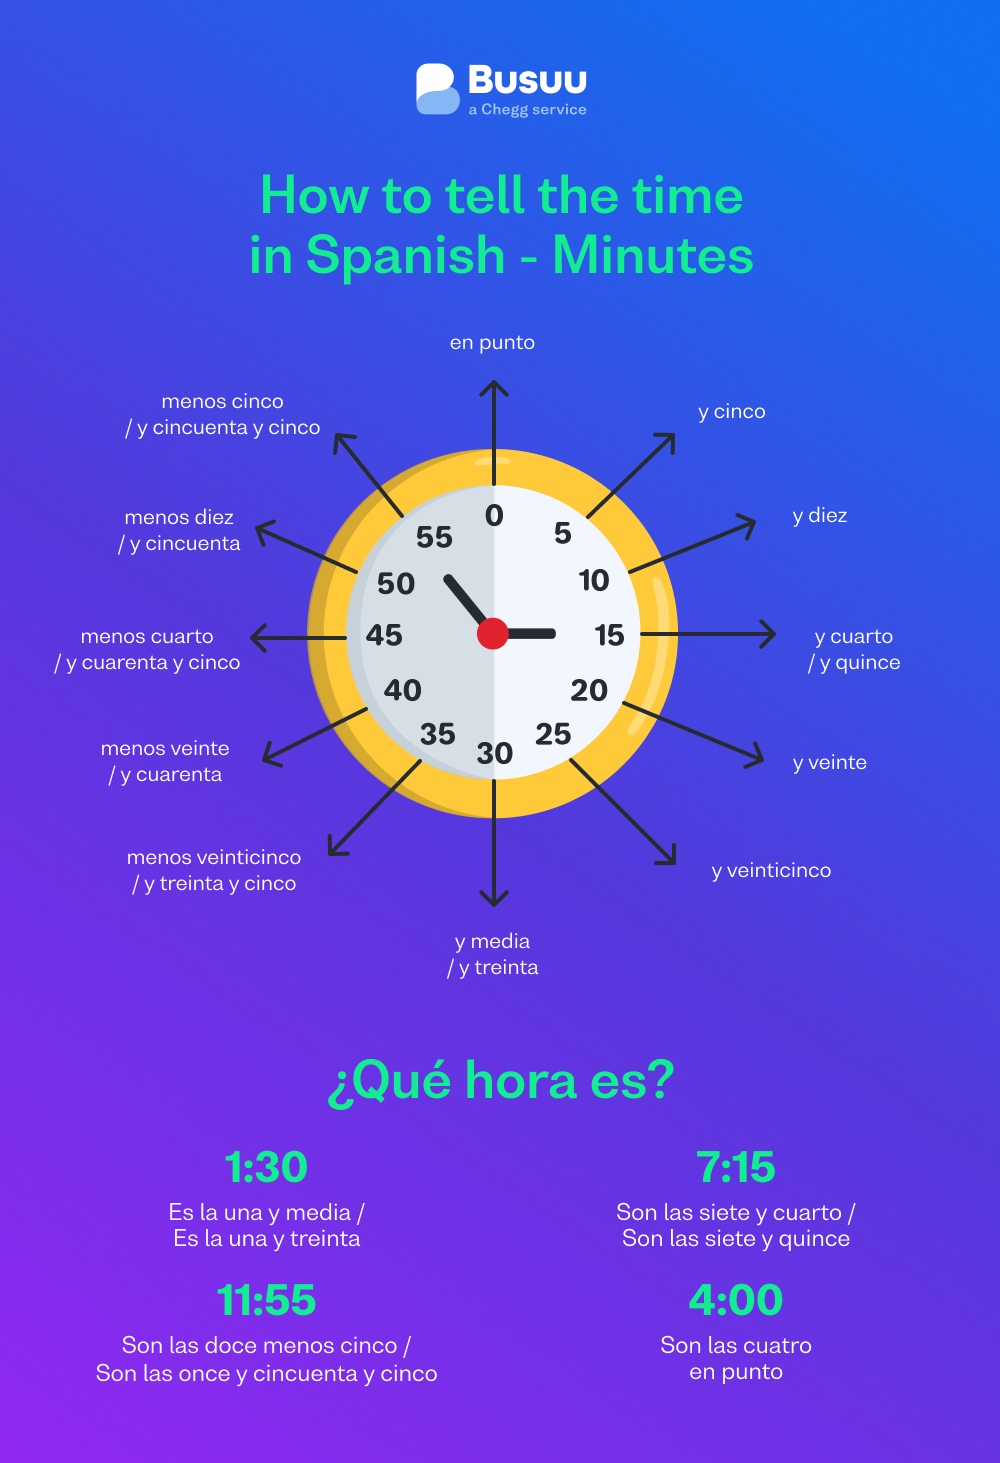 Time in Spanish - MInutes